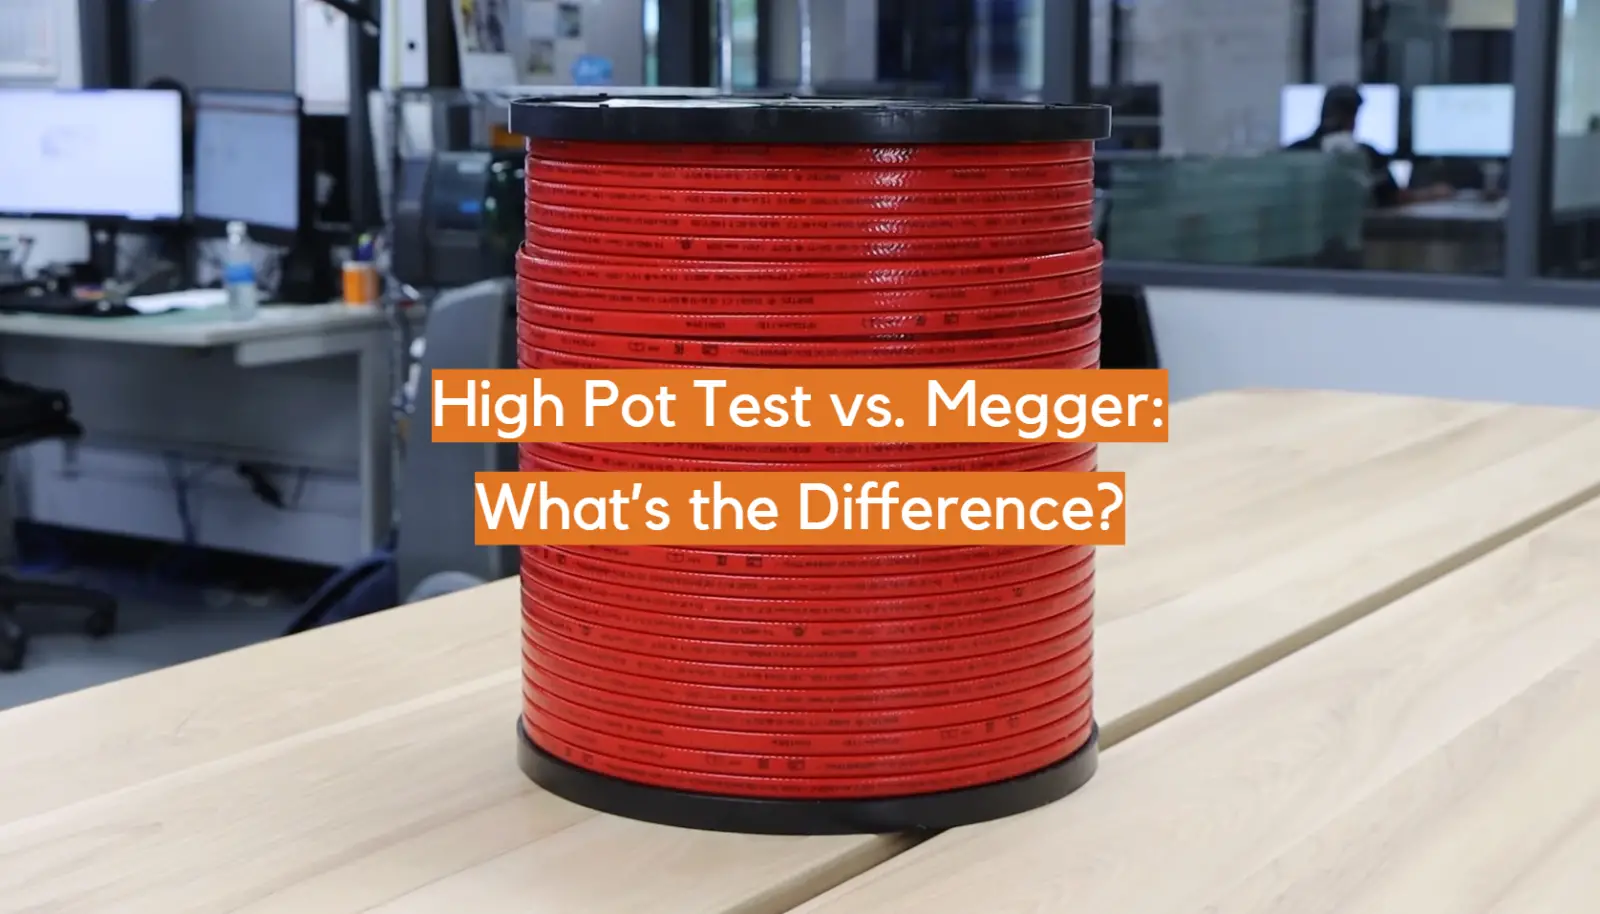 High Pot Test vs. Megger: What’s the Difference?